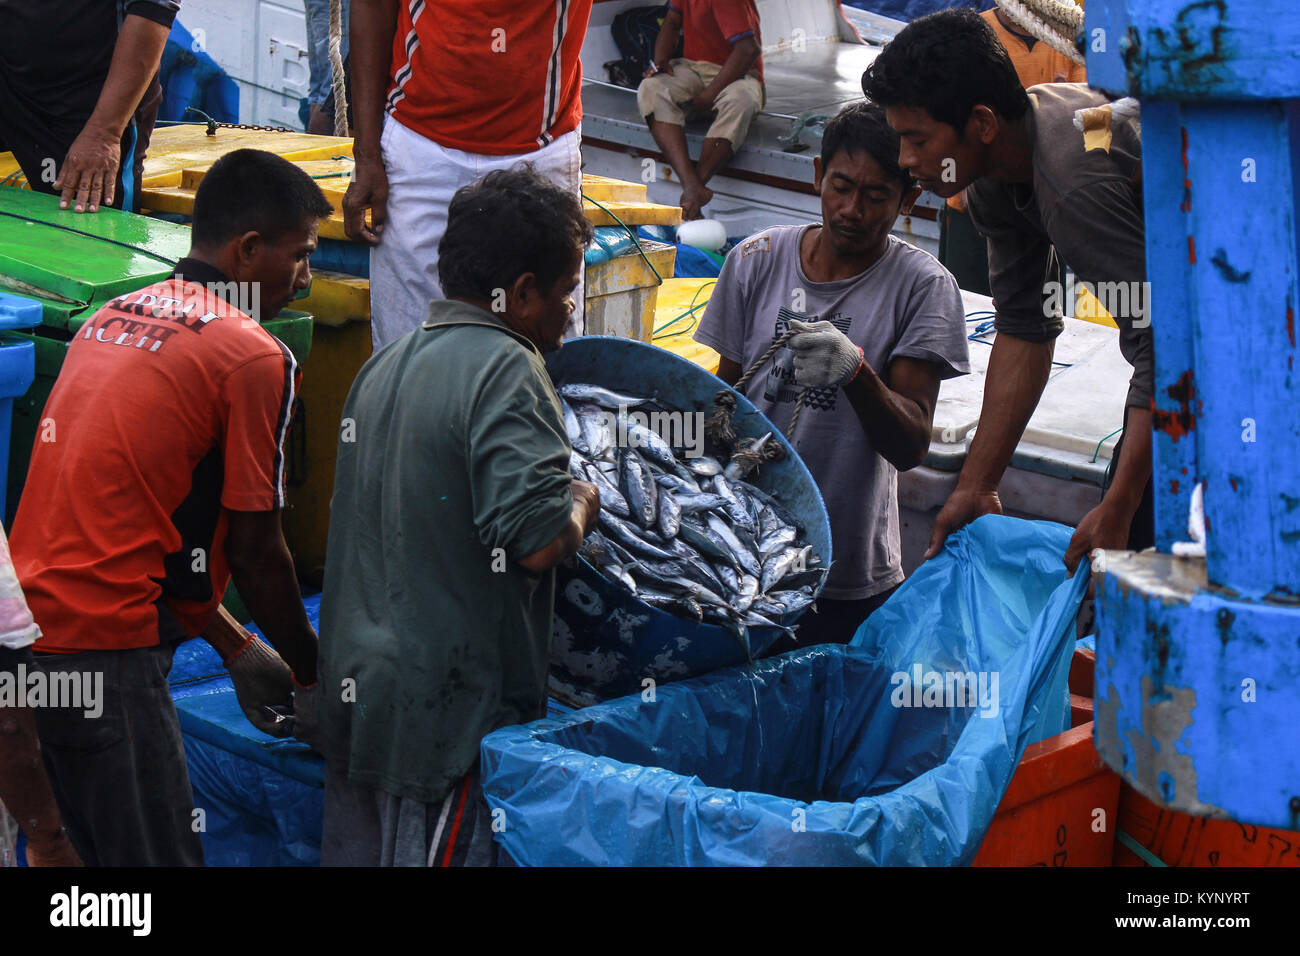 Lhokseumawe, Aceh, Indonesia. 15th Jan, 2018. Workers seen moving fish containers from ships to be auctioned at the traditional market of Lhokseumawe City. The Indonesian government raised its fisheries target in 2018 by 9.45 million tons from the previous year's target of only 7.8 million tons. Credit: Maskur Has/SOPA/ZUMA Wire/Alamy Live News Stock Photo